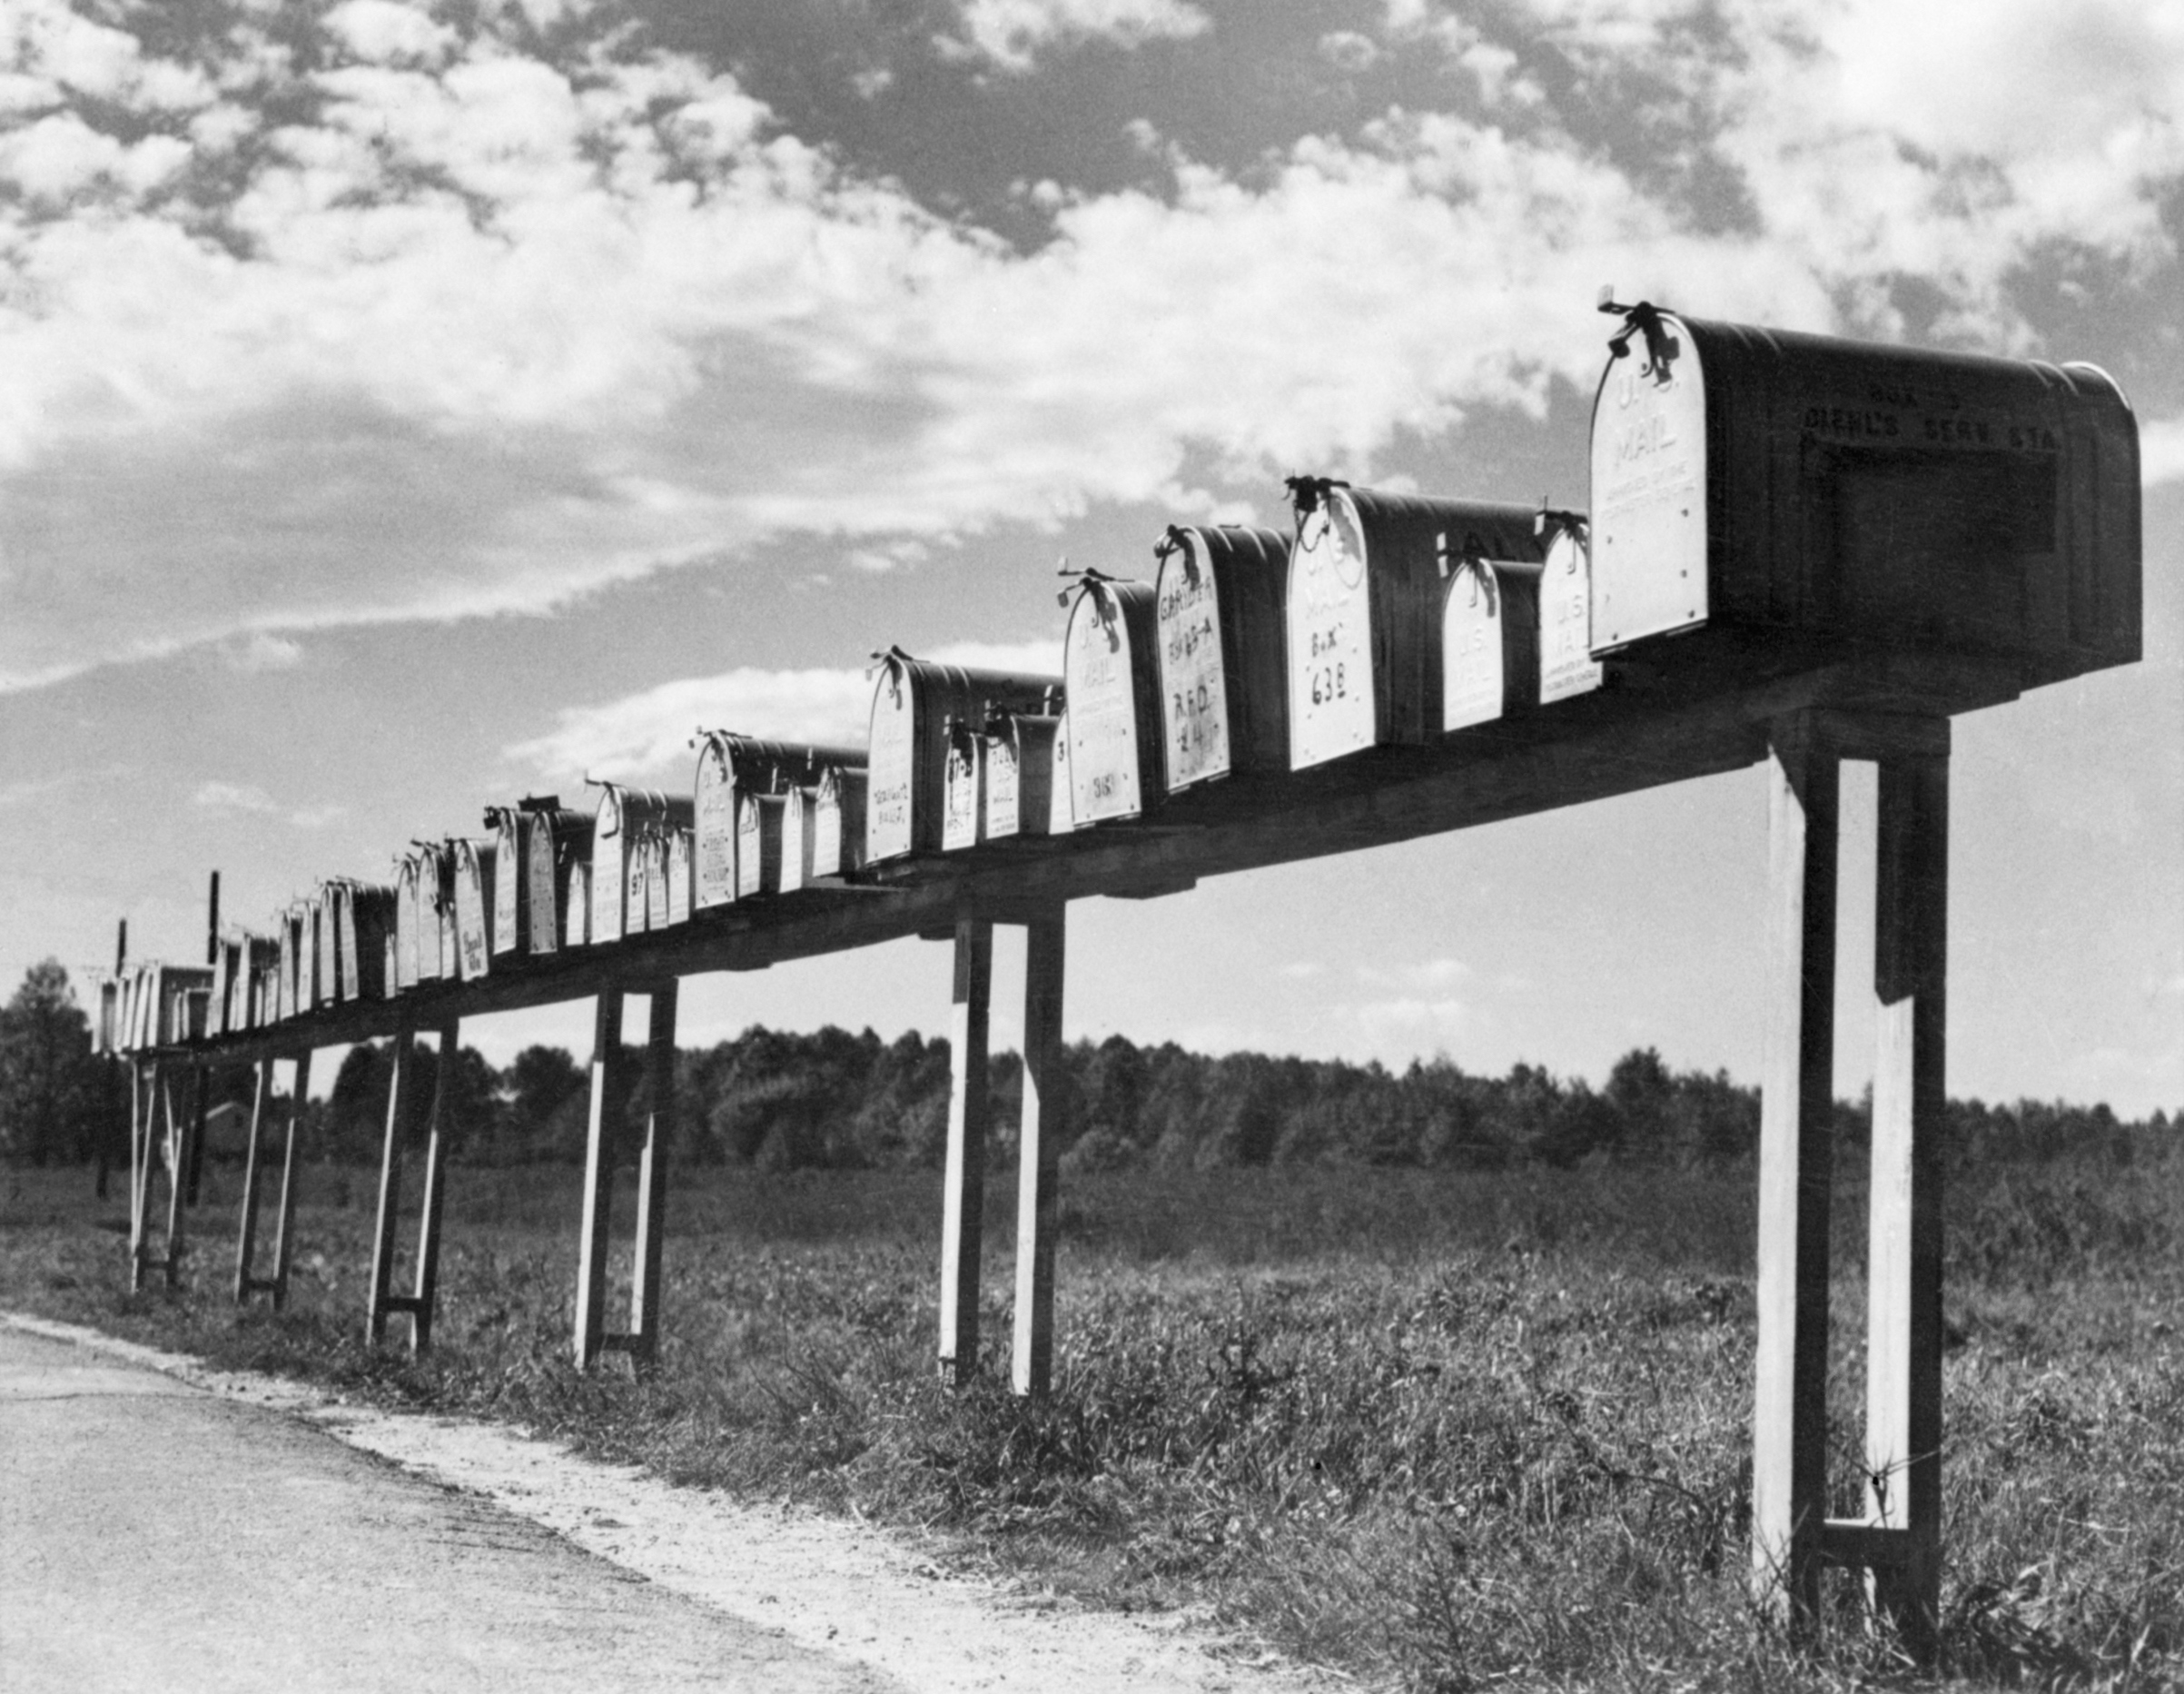 Mailboxes on a country road, circa 1940 (Bettmann/Getty Images)